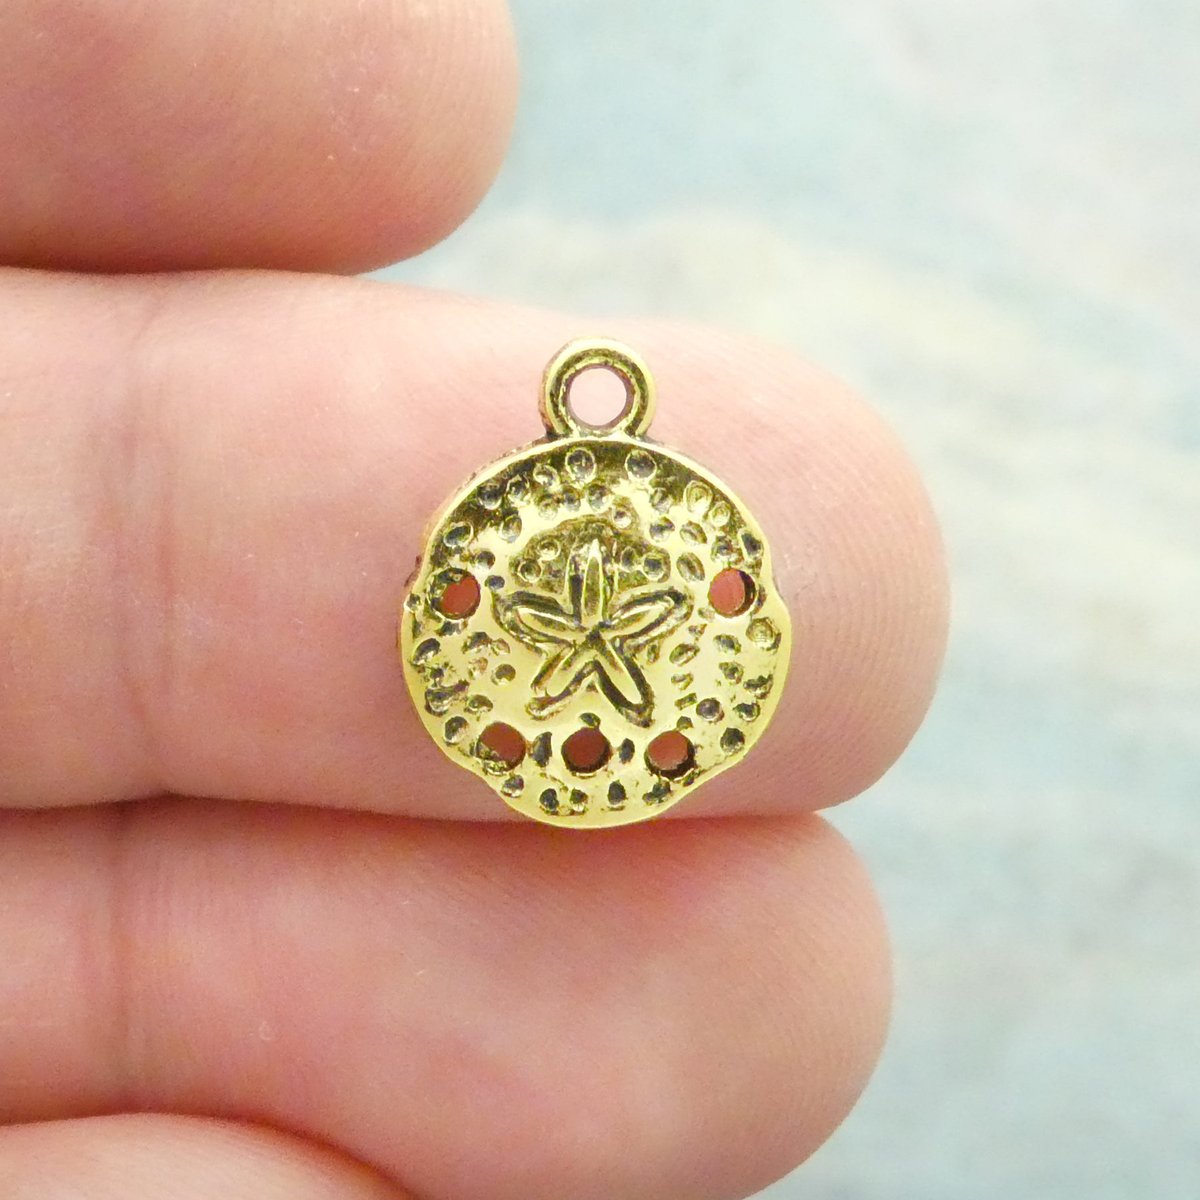 Excited to share the latest addition to my #etsy shop: 20 Tiny Gold Sand Dollar Charm Pendant 16x13mm by TIJC SP2063 etsy.me/2TmMj0m #gold #sanddollarcharm #sanddollarpendant #sanddollarearrings #sanddollarjewelry #sanddollarnecklace #seashellbracelet